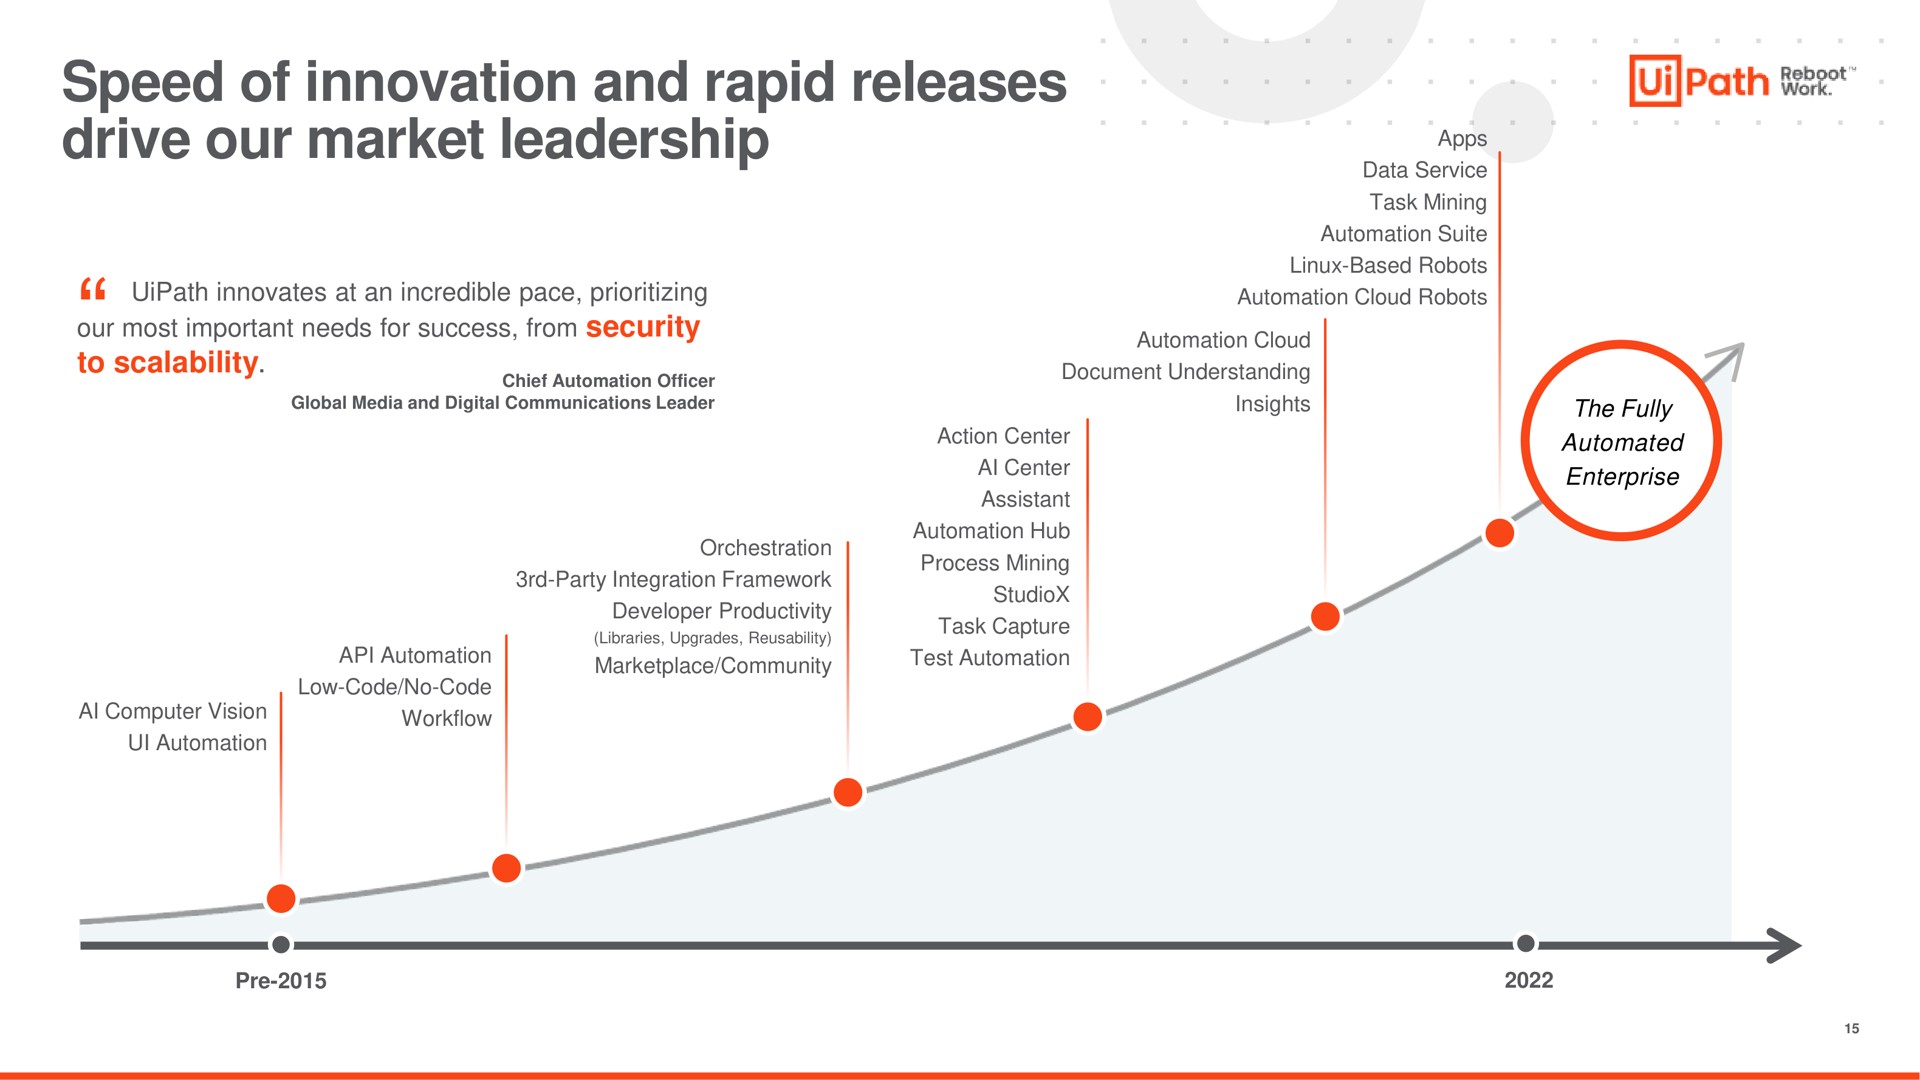 speed of innovation and rapid releases drive our market leadership path | UiPath